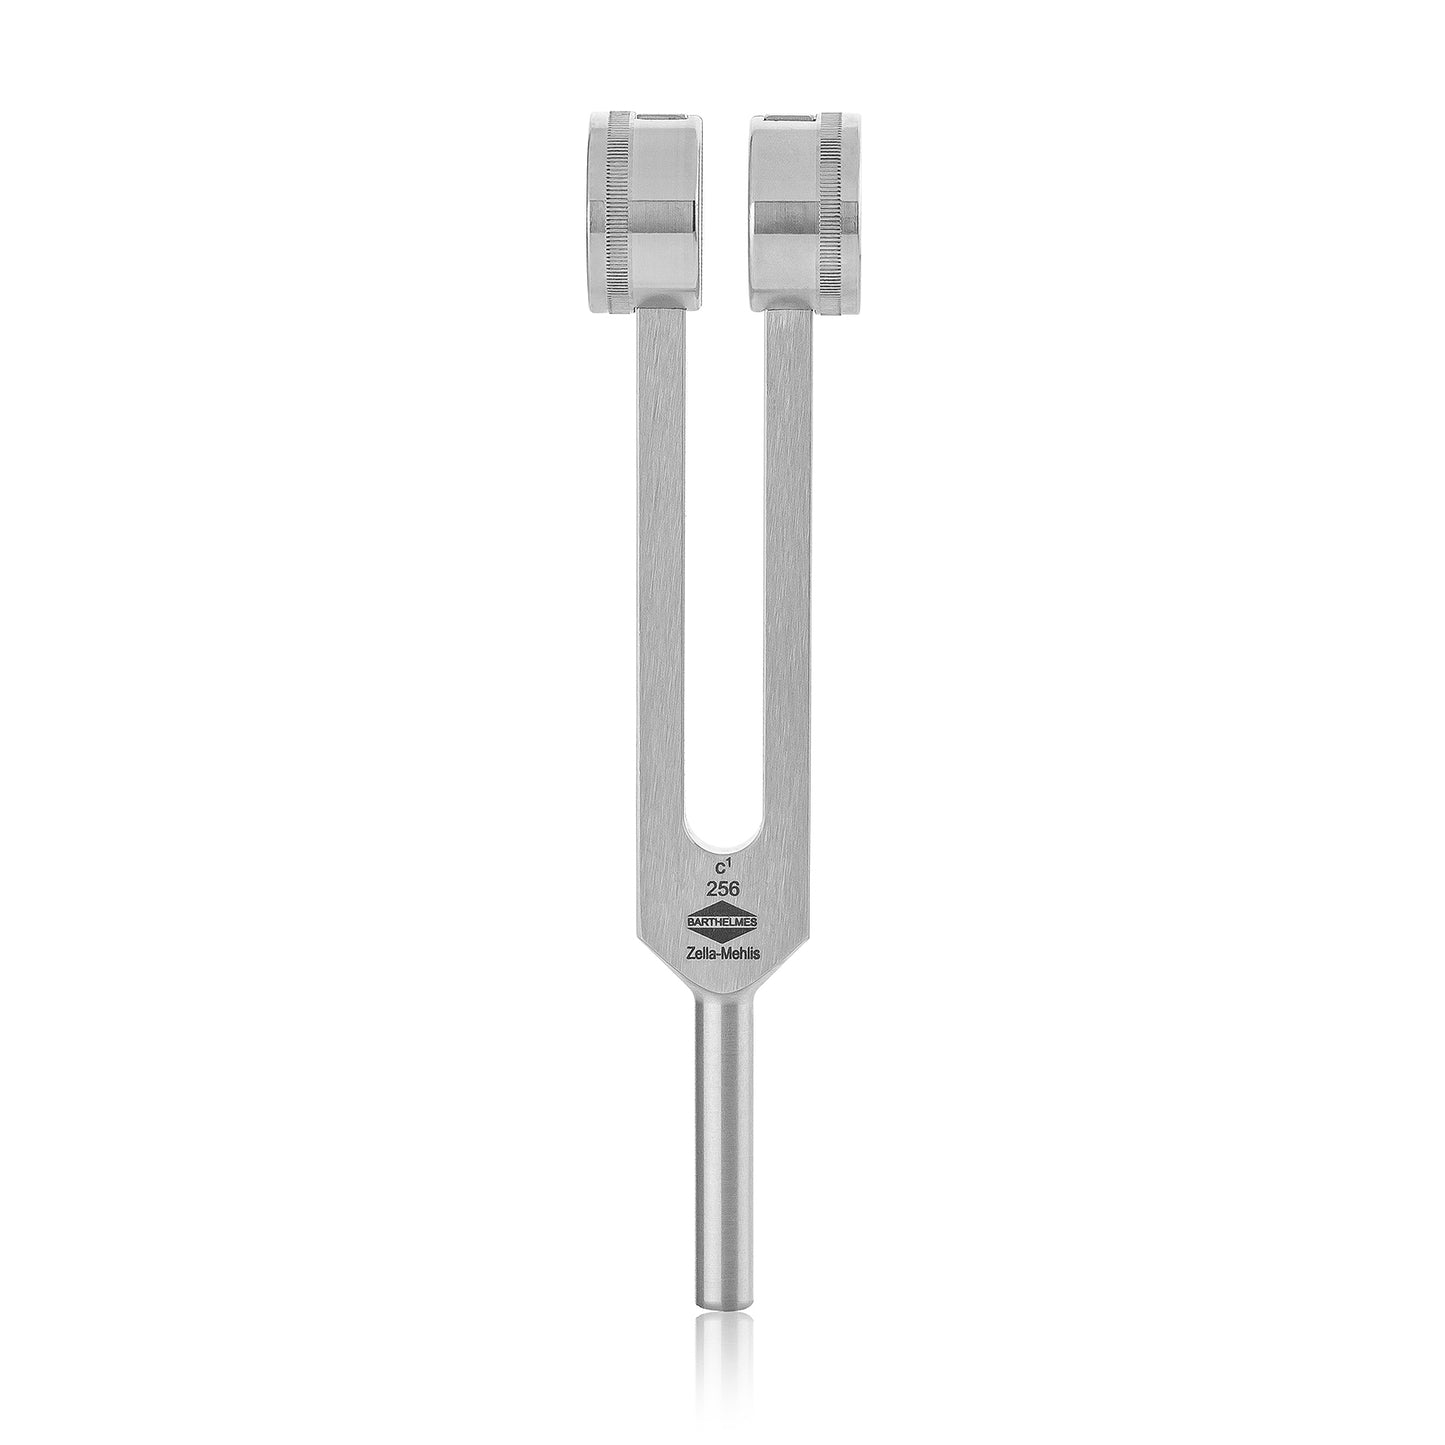 Barthelmes tuning fork c1 256 Hz for ear doctors made of light metal with damper